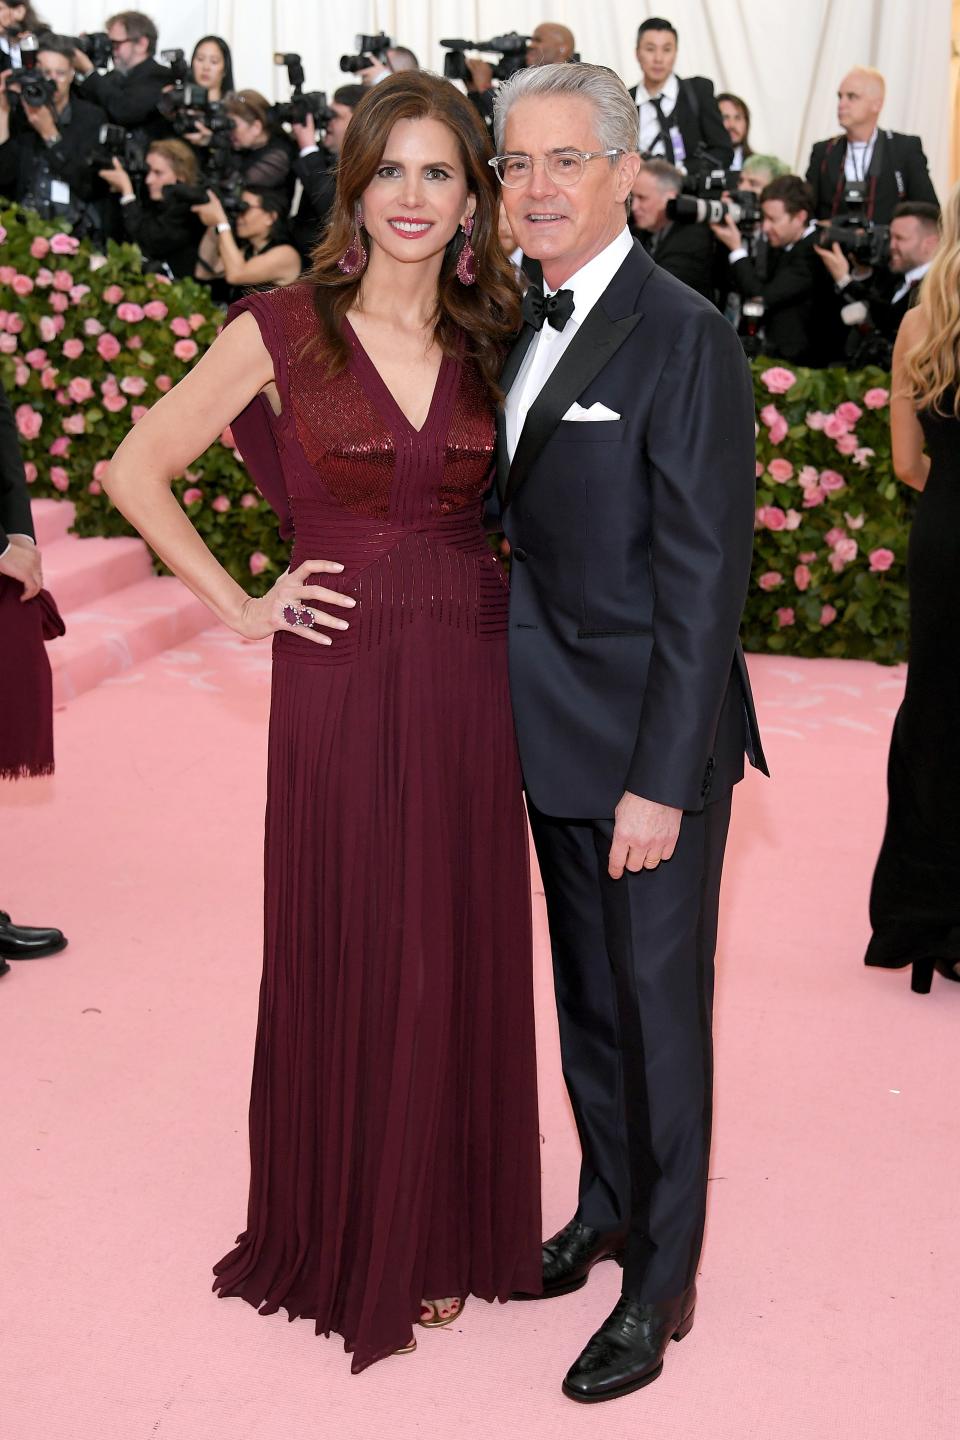 <h1 class="title">Desiree Gruber in Zac Posen and Kyle MacLachlan</h1><cite class="credit">Photo: Getty Images</cite>